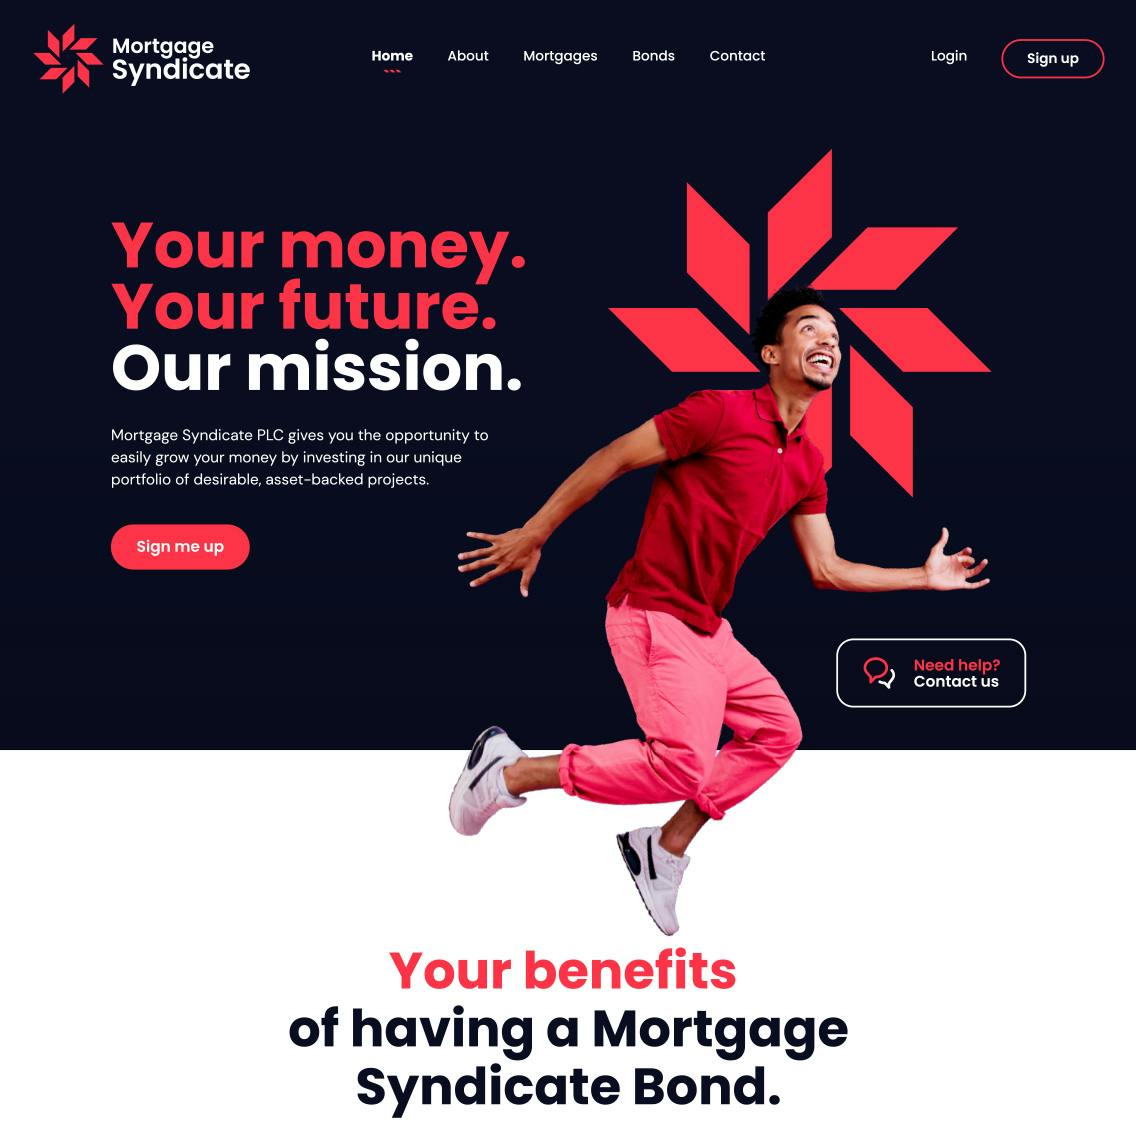 Mortgage Syndicate Website